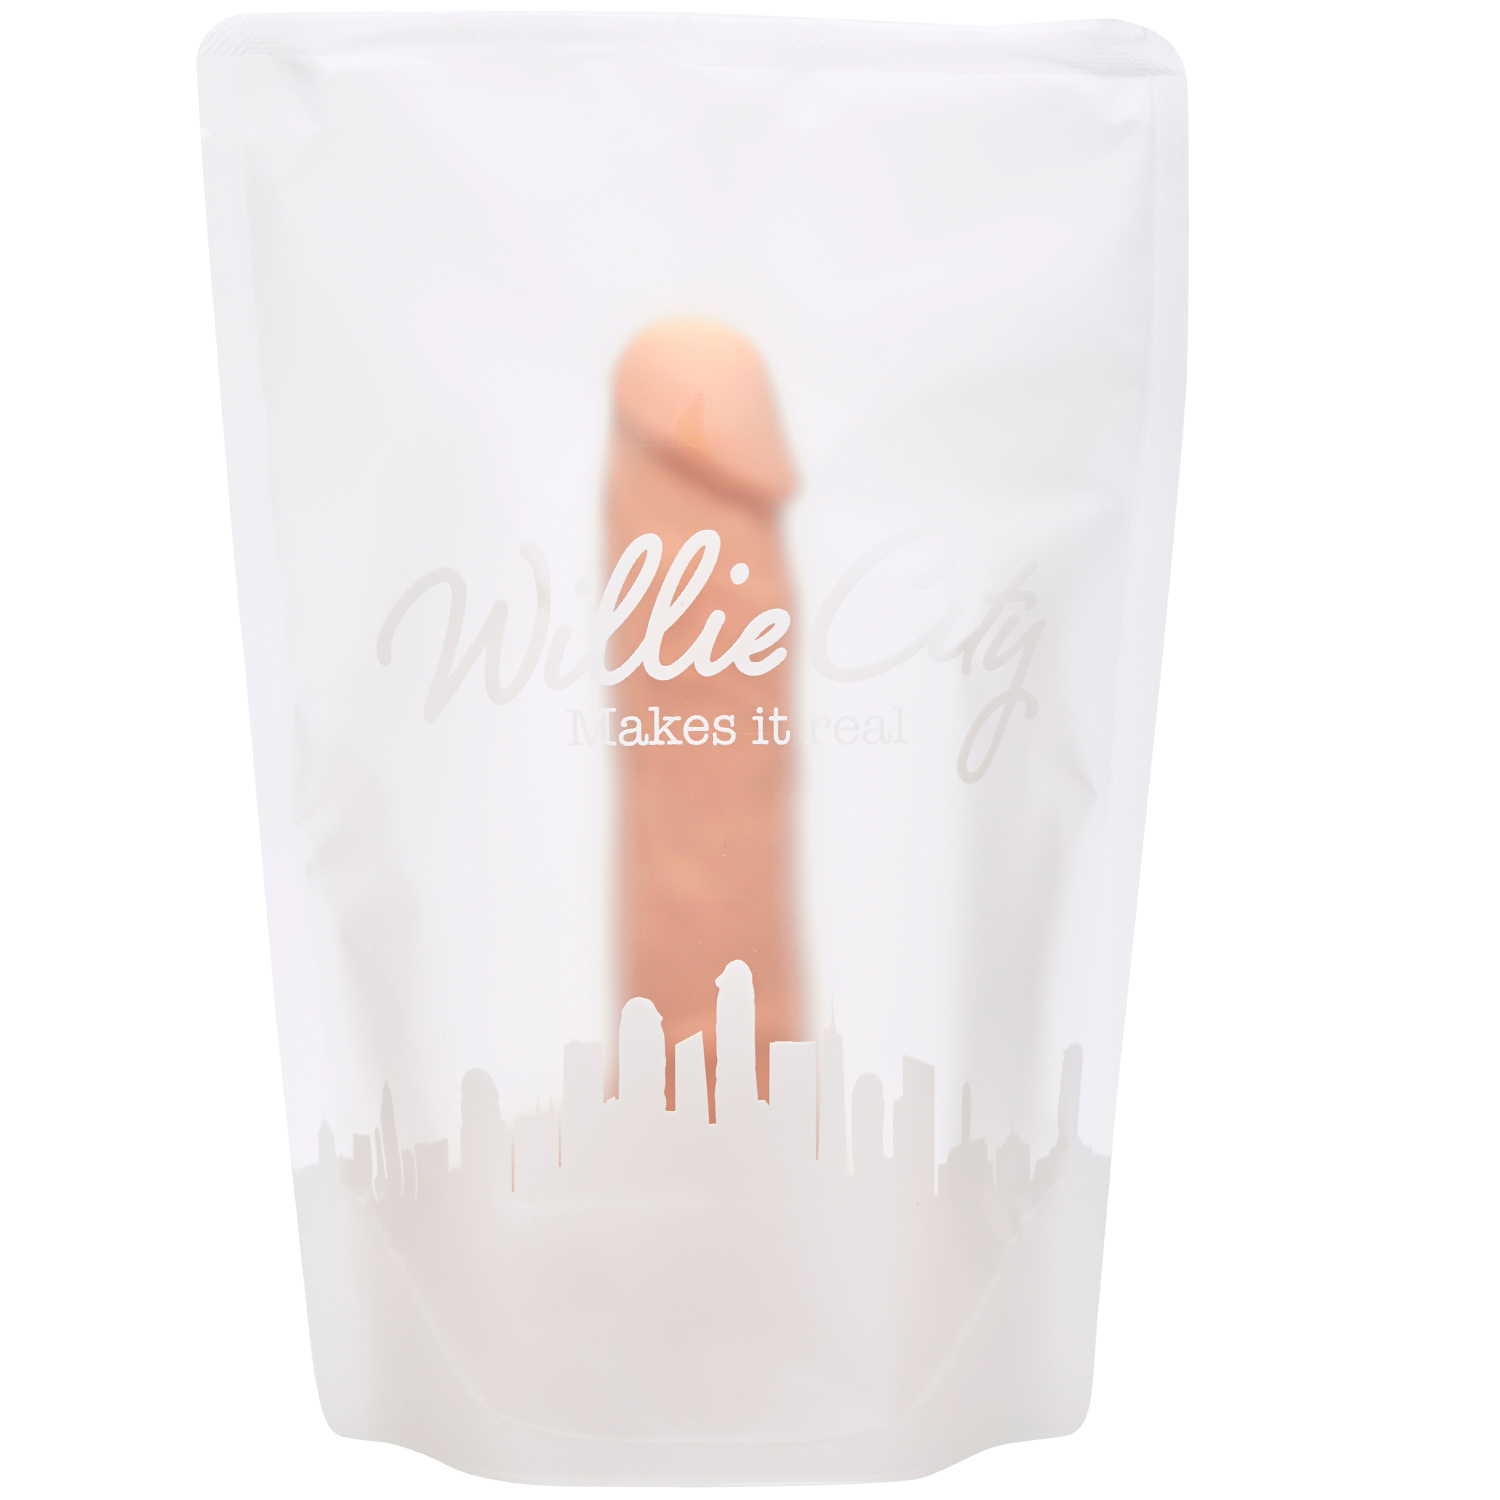 Willie City Luxe Super Realistisk Silikone Dildo 22 cm   - Nude thumbnail